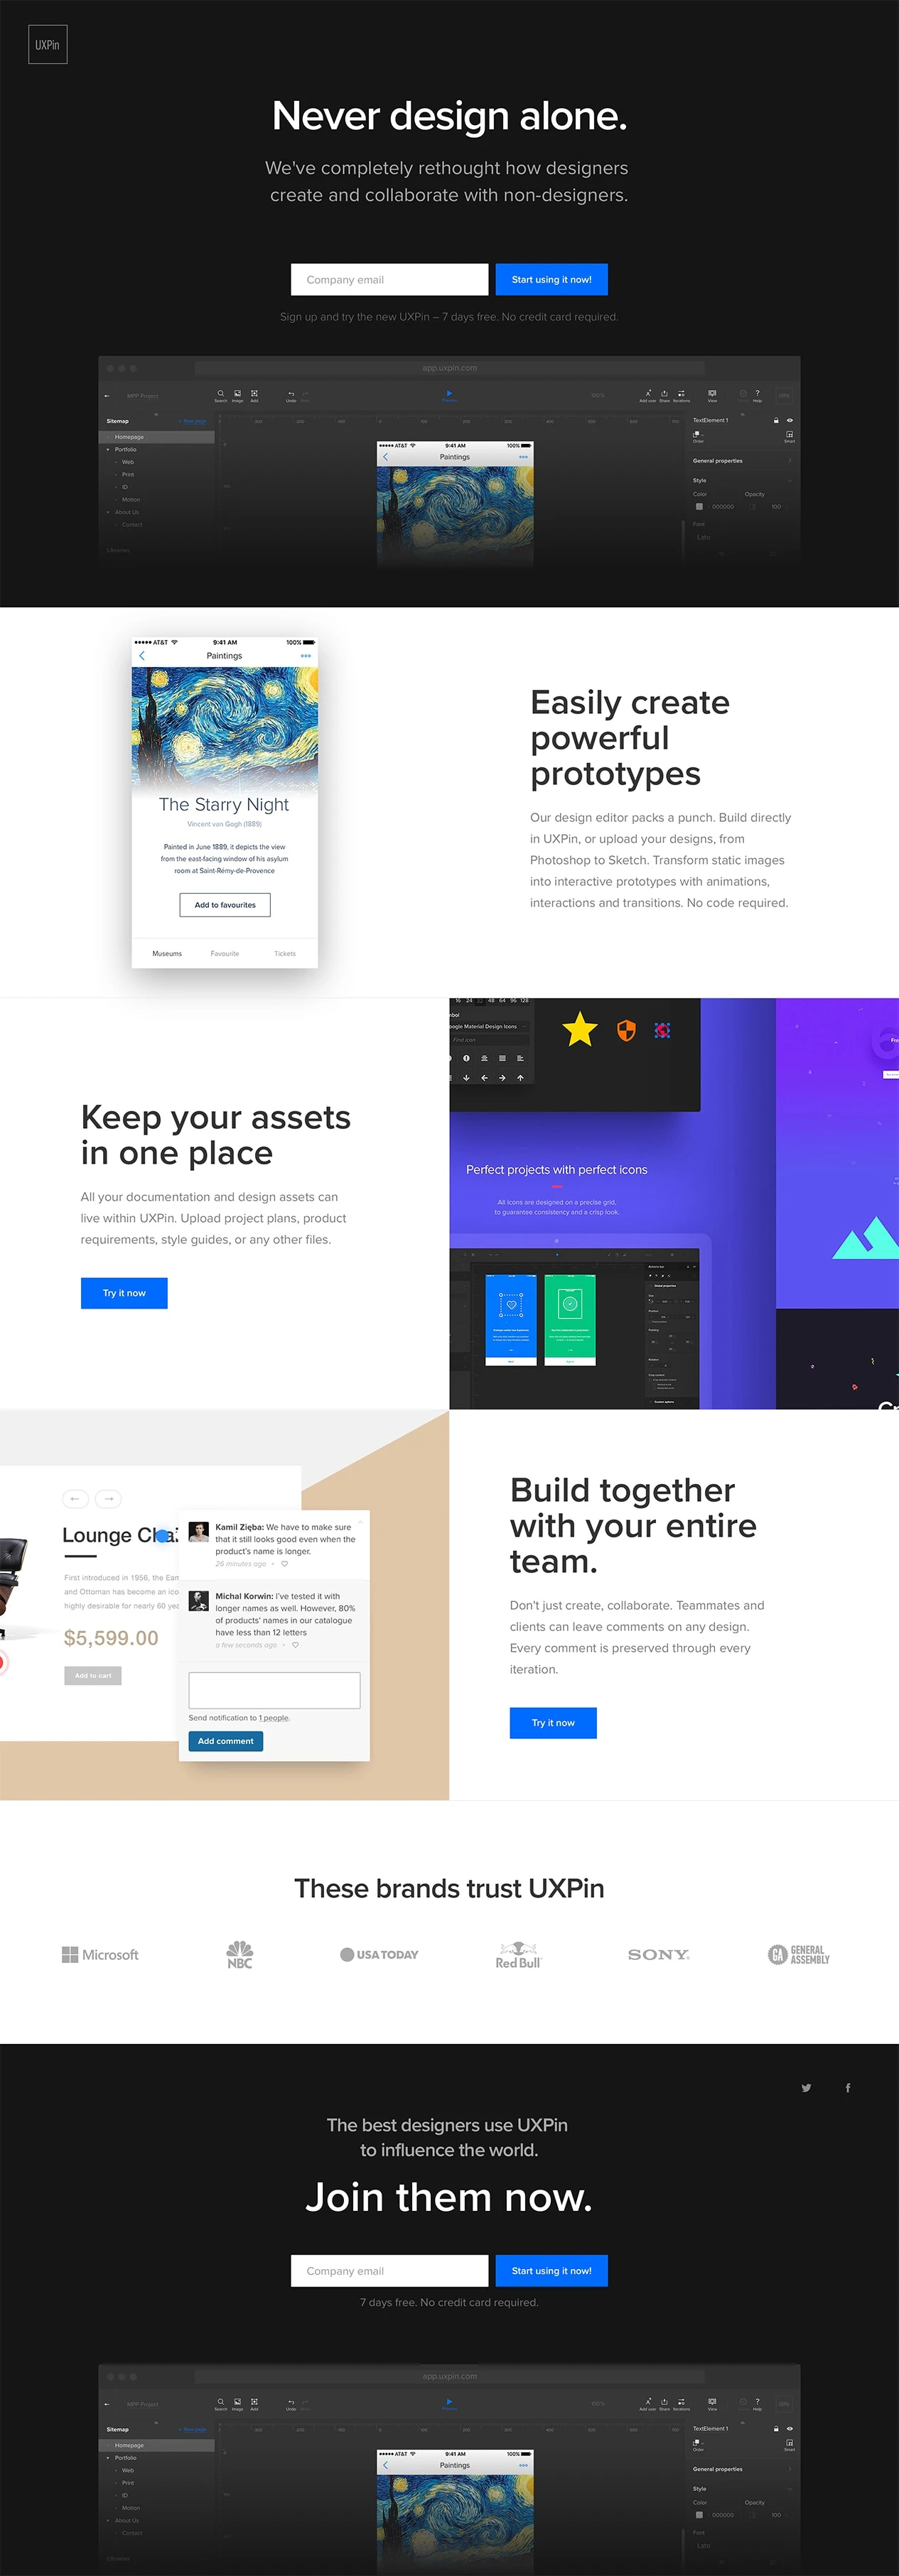 UXPin Landing Page Example: We've completely rethought how designers create and collaborate with non-designers.